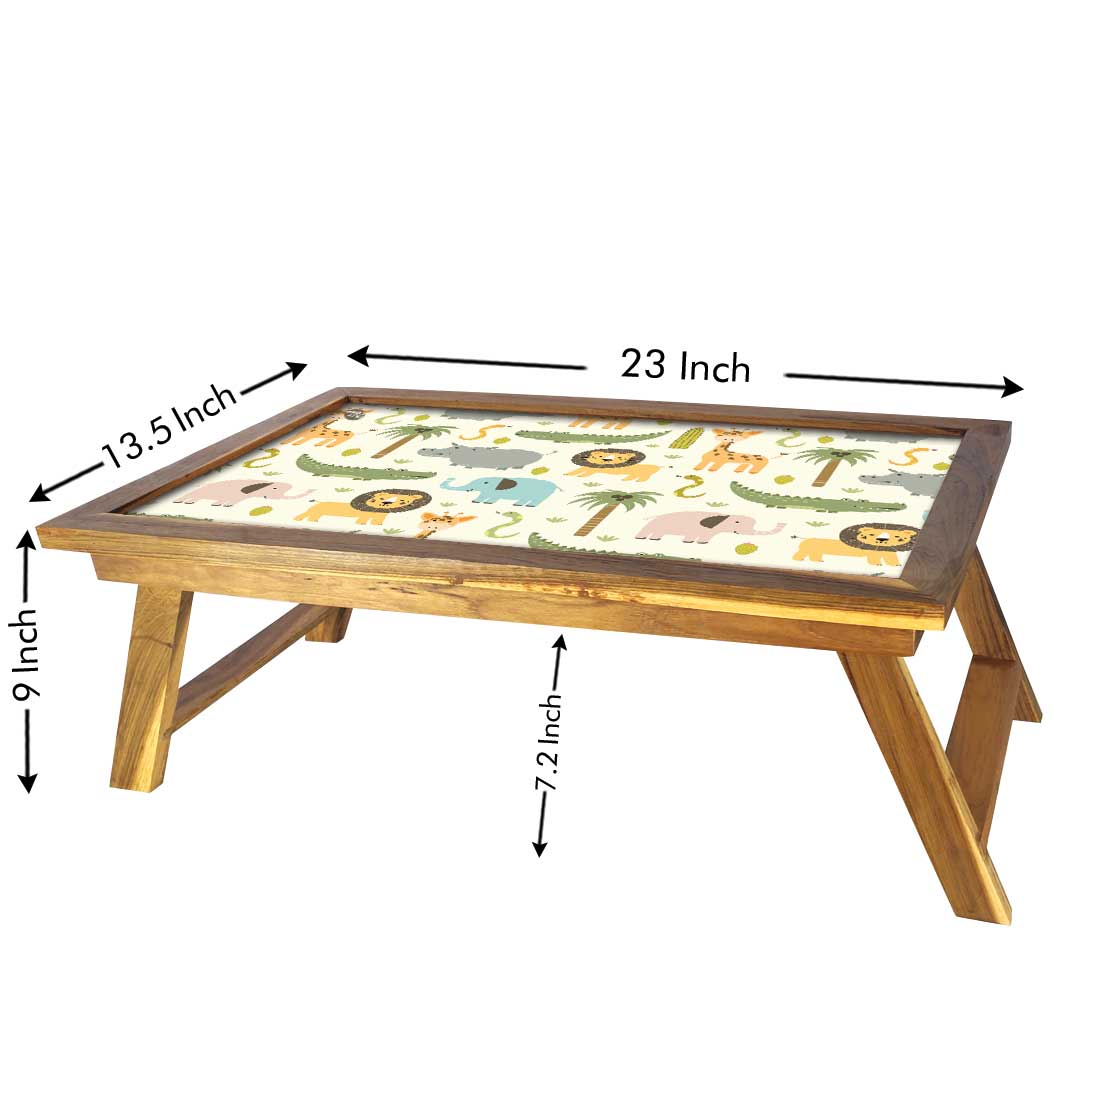 Folding Laptop Table for Home Bed Breakfast Tables Study Desk - Animals Nutcase